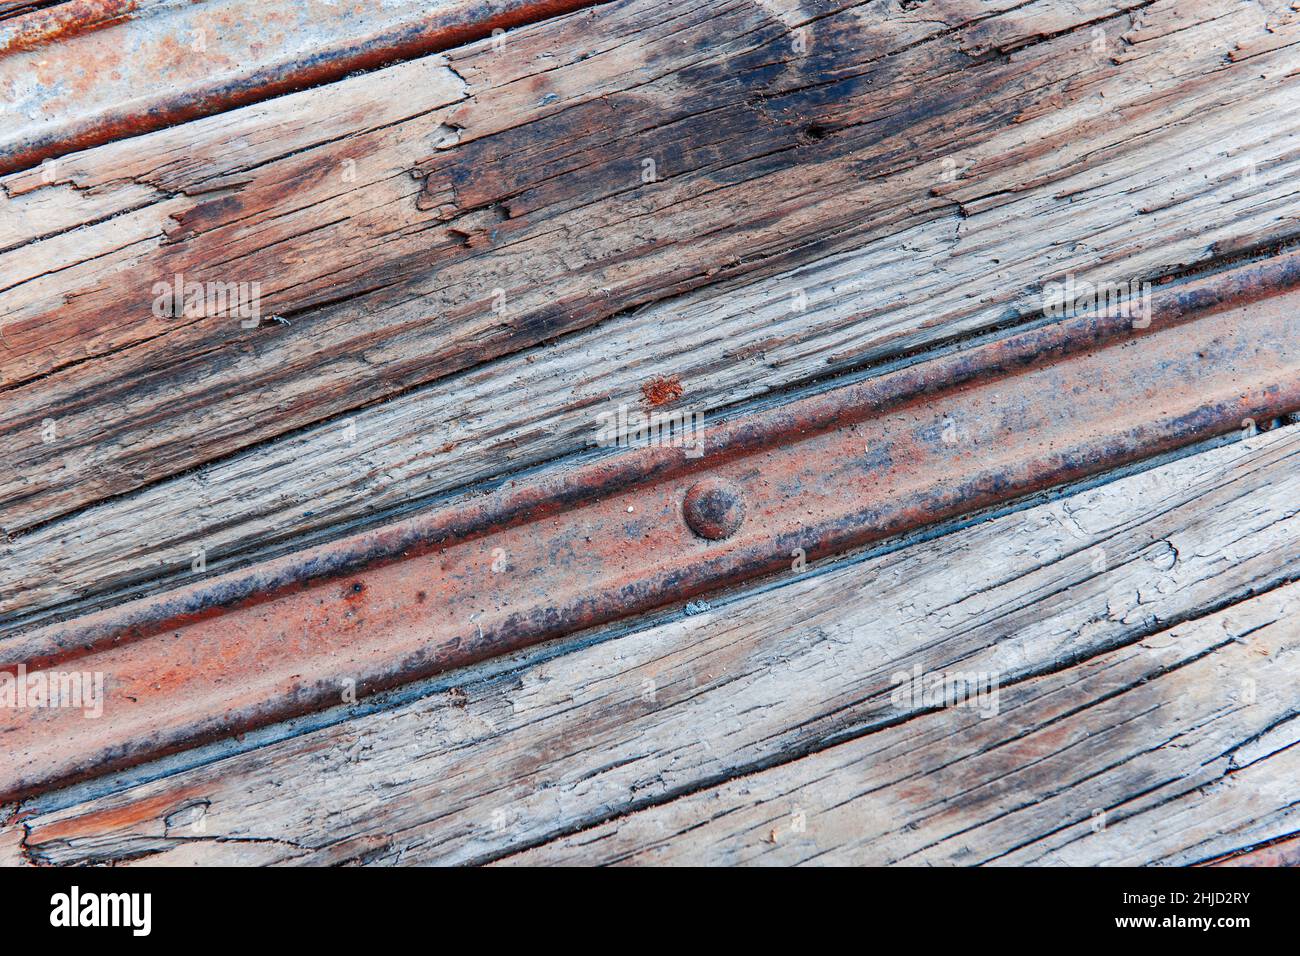 Format-filling view of a rusty metal rail in the weathered wood in an oblique view. Stock Photo